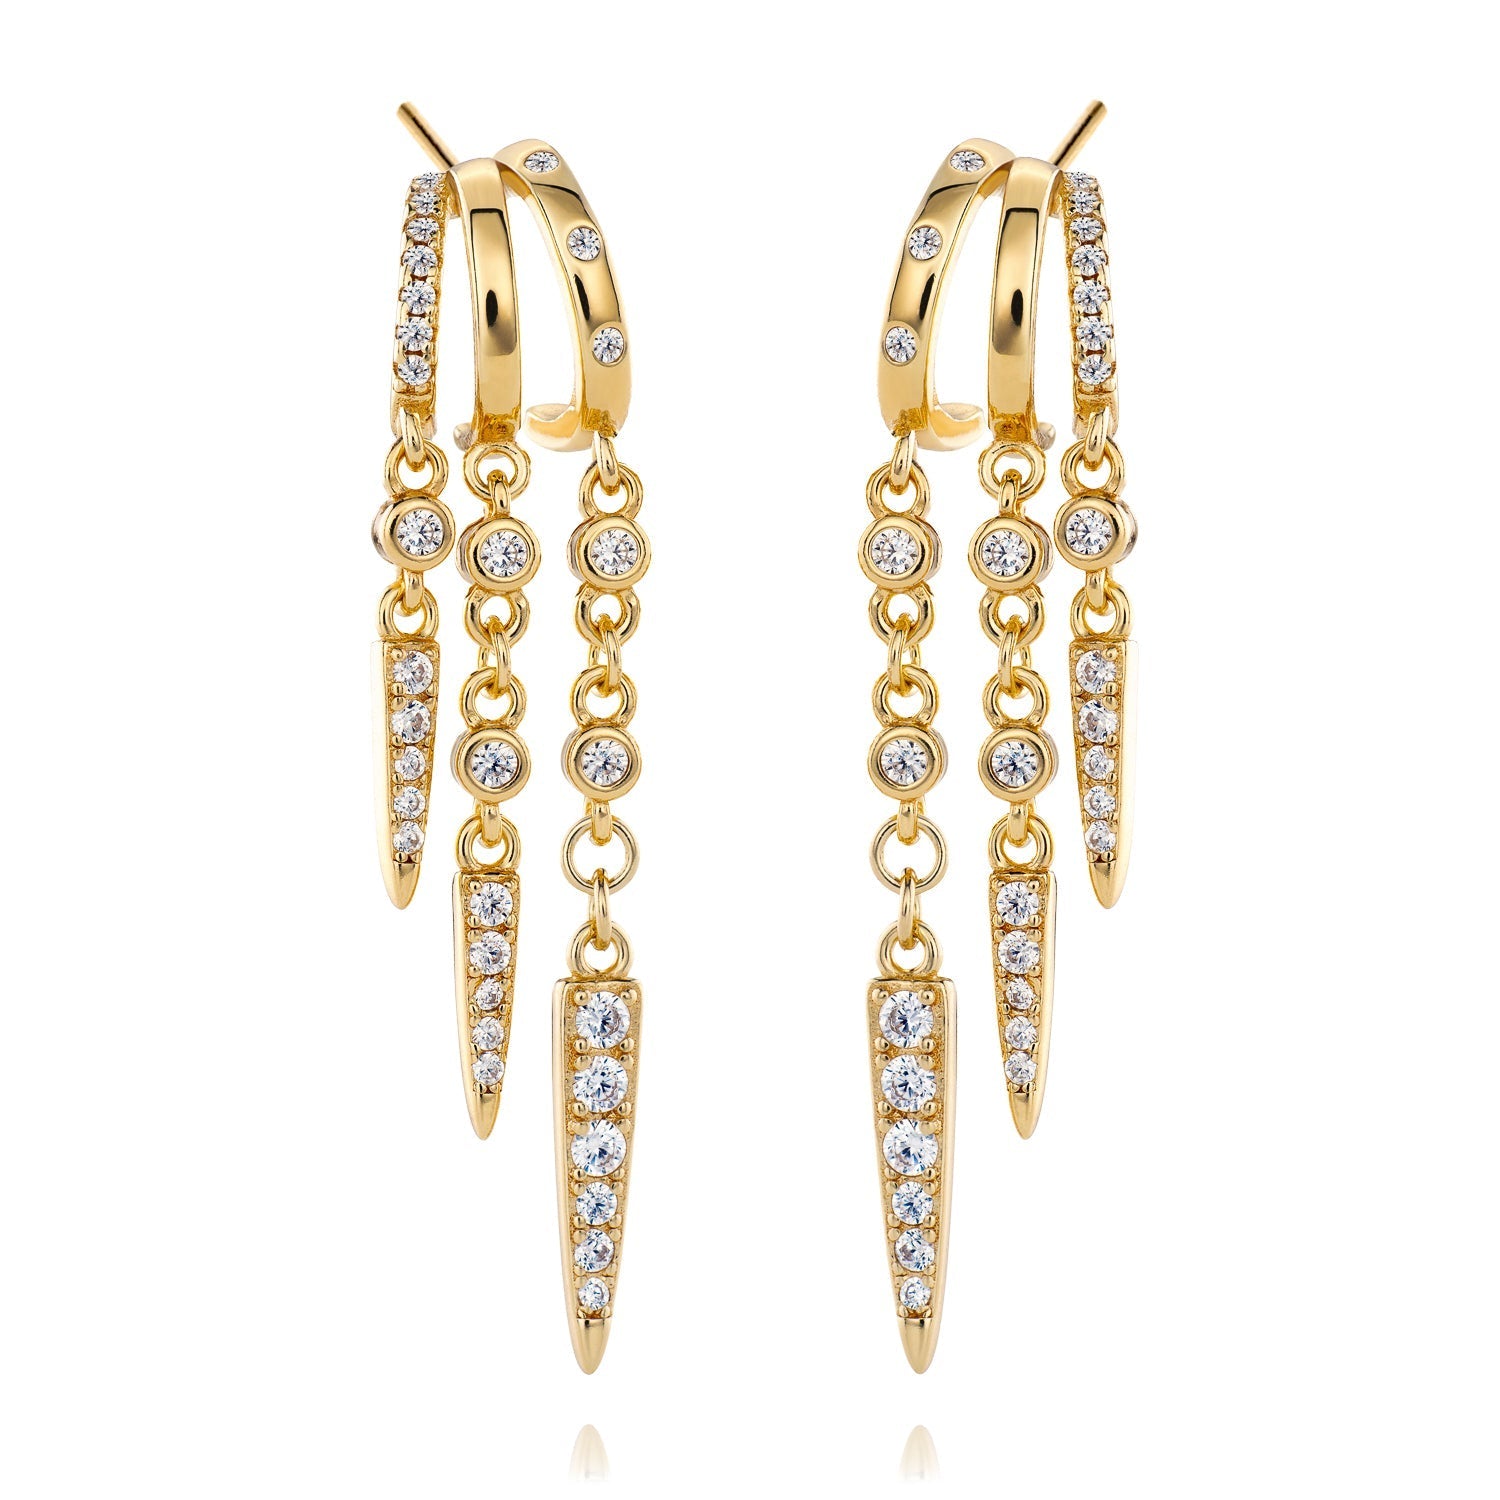 Rio Earrings - Solid Gold